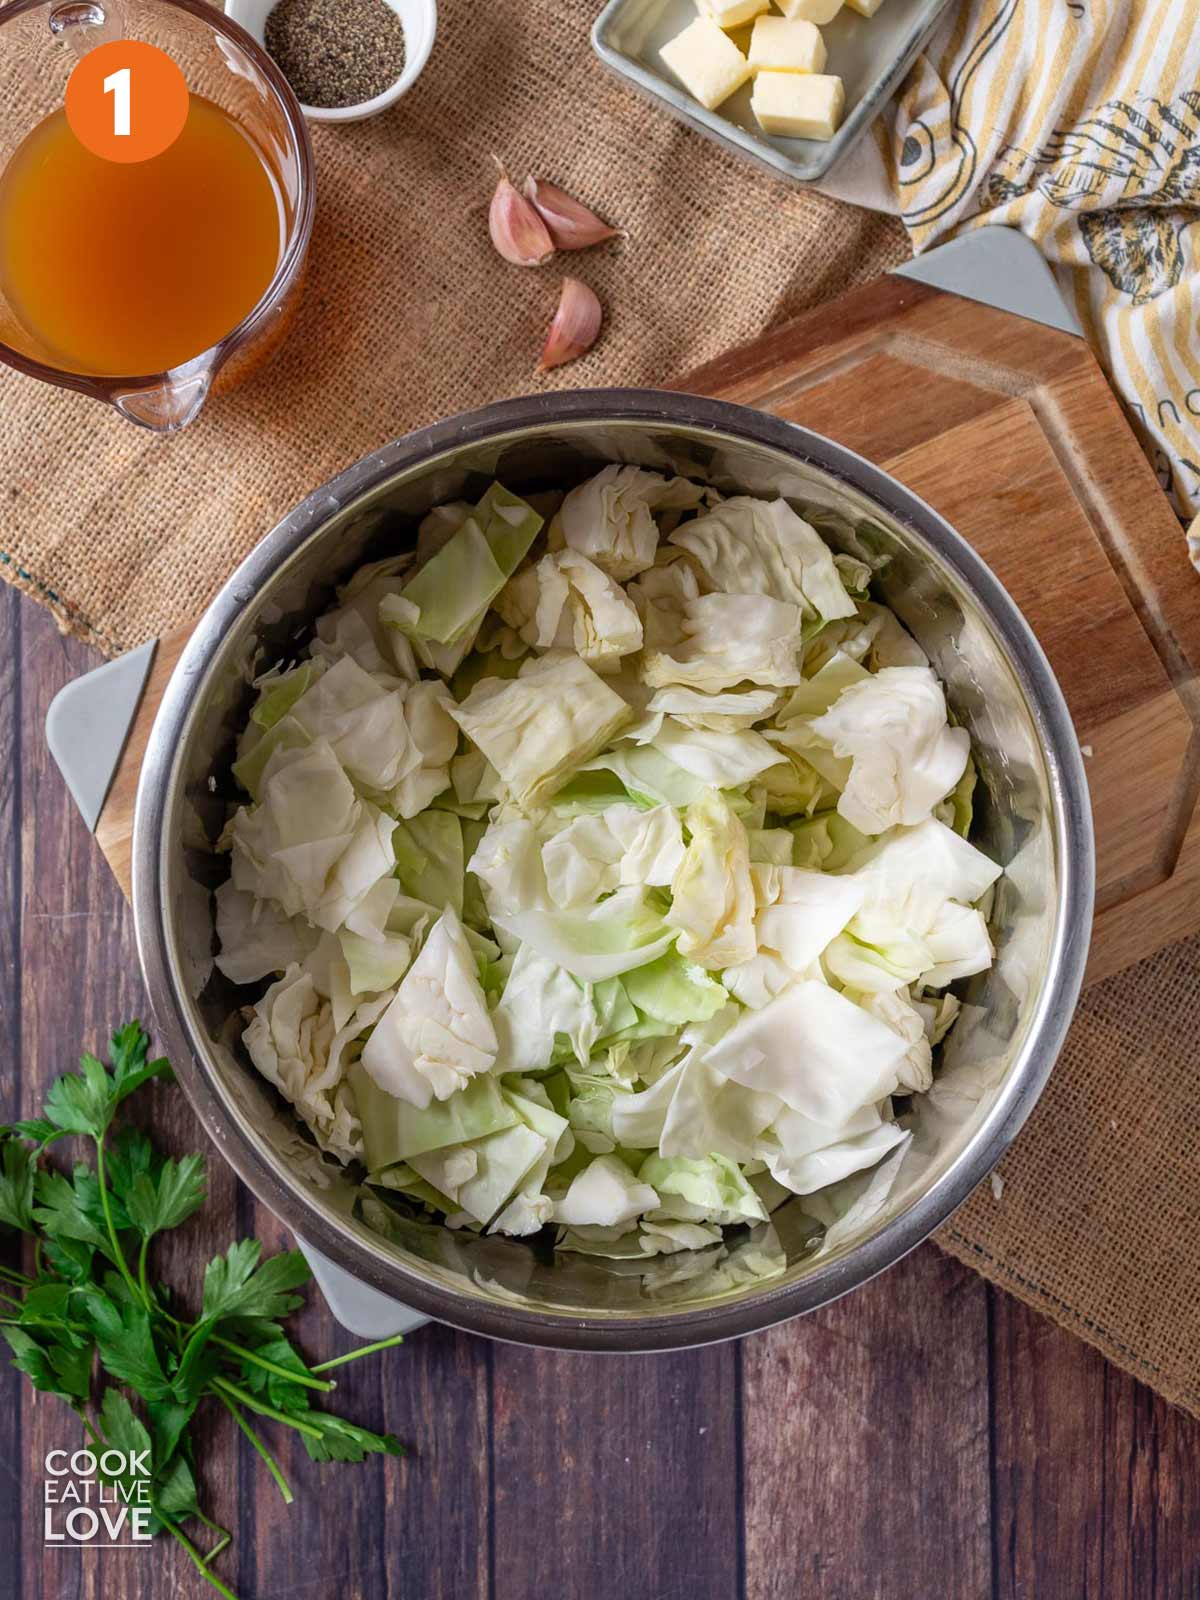 Chopped cabbage in the liner of the Instant Pot.